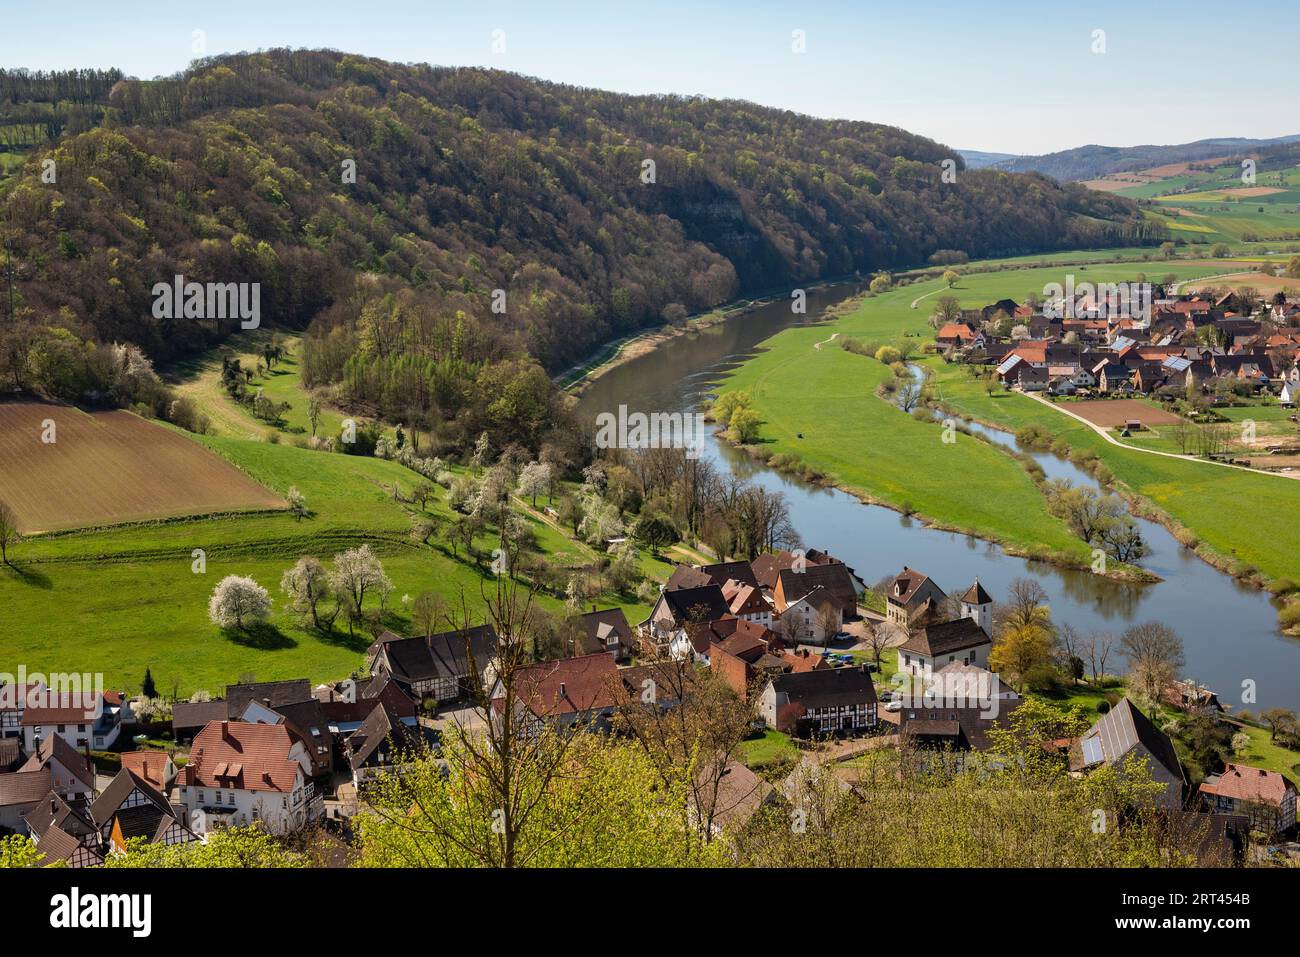 Elevated view of the picturesque villages of Rühle and Pegestorf alongside the Weser river, Rühler Schweiz, Weserbergland, Germany Stock Photo